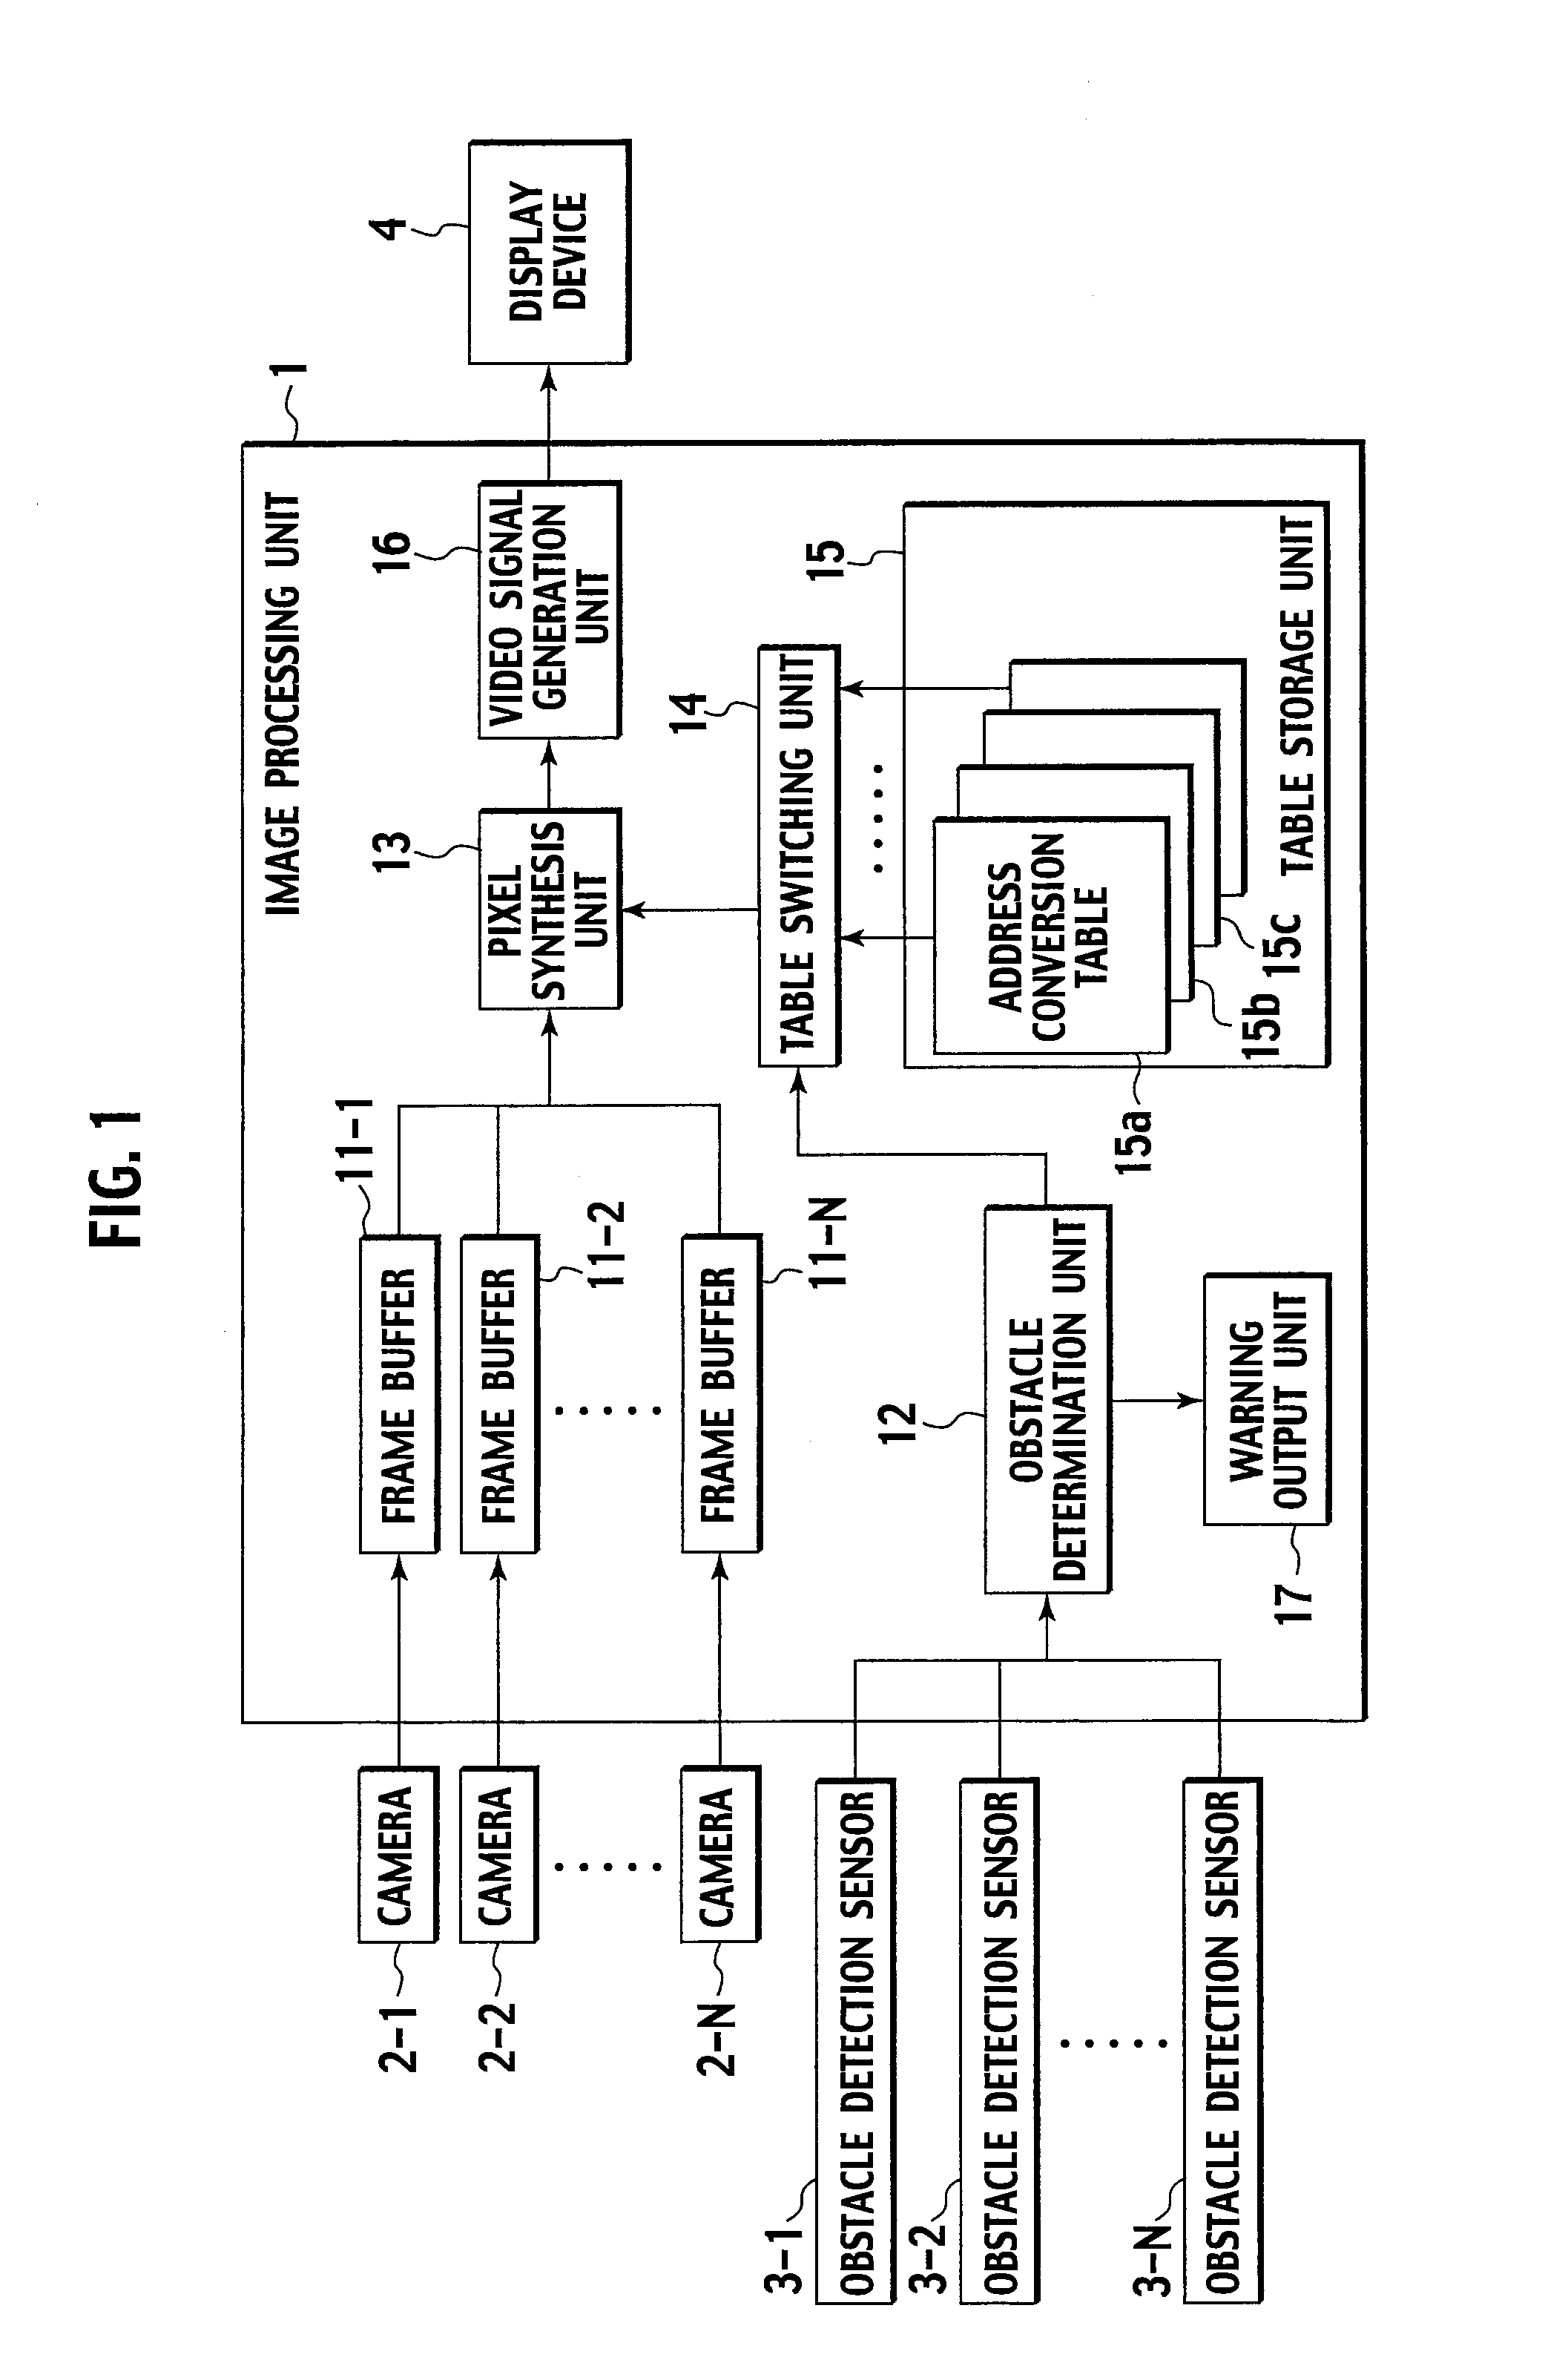 Device and method for monitoring vehicle surroundings